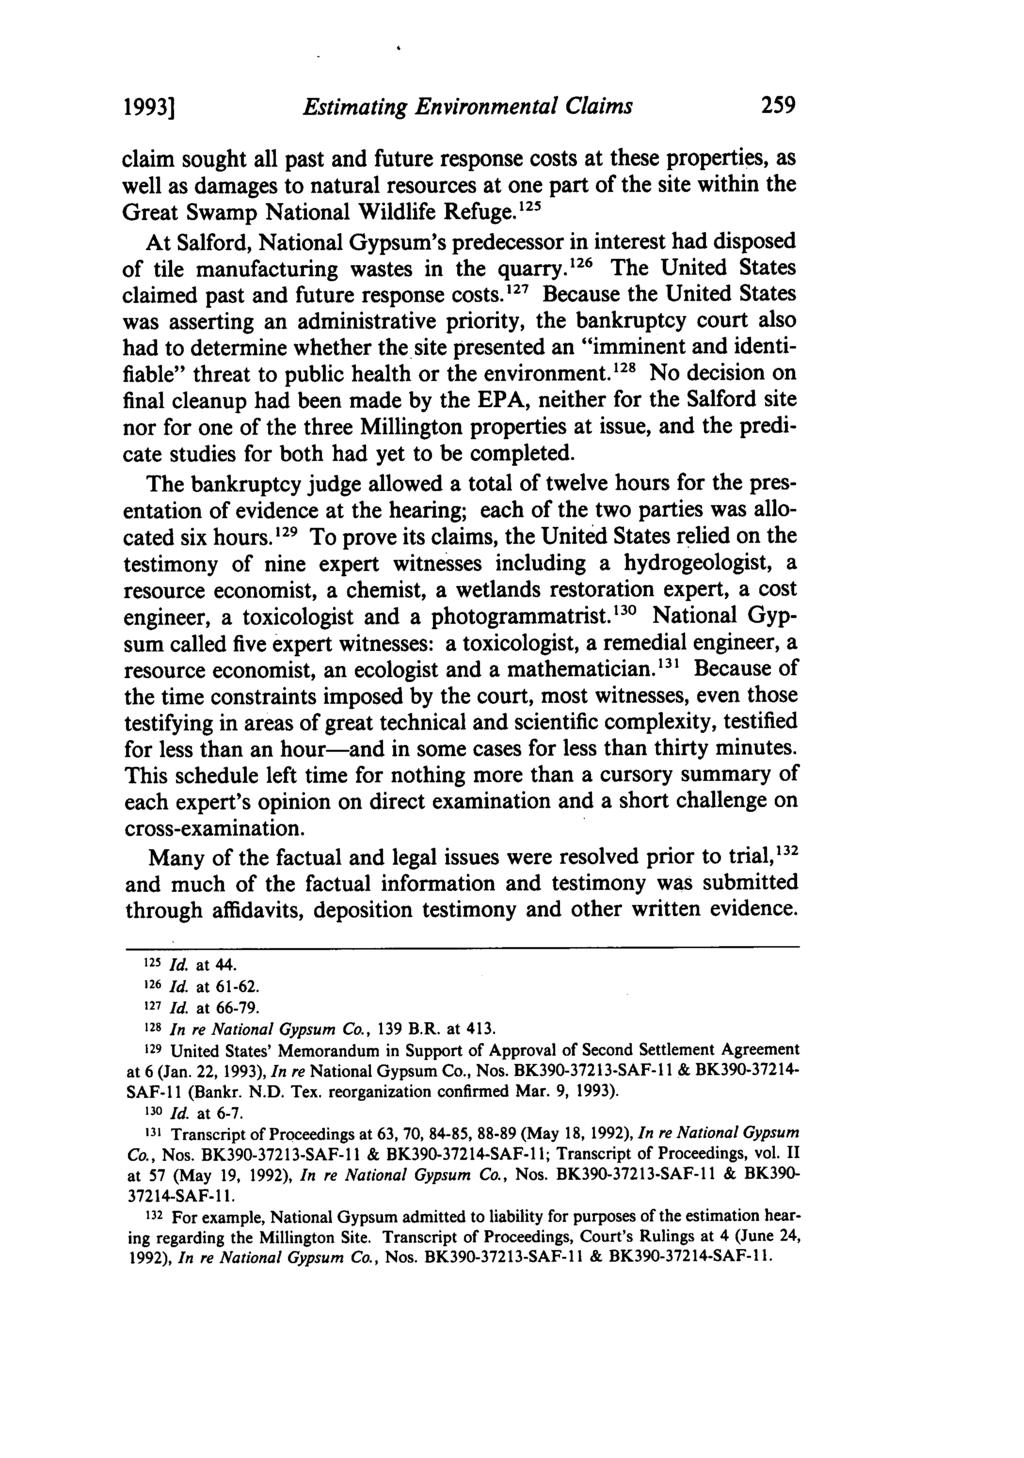 1993] Estimating Environmental Claims claim sought all past and future response costs at these properties, as well as damages to natural resources at one part of the site within the Great Swamp